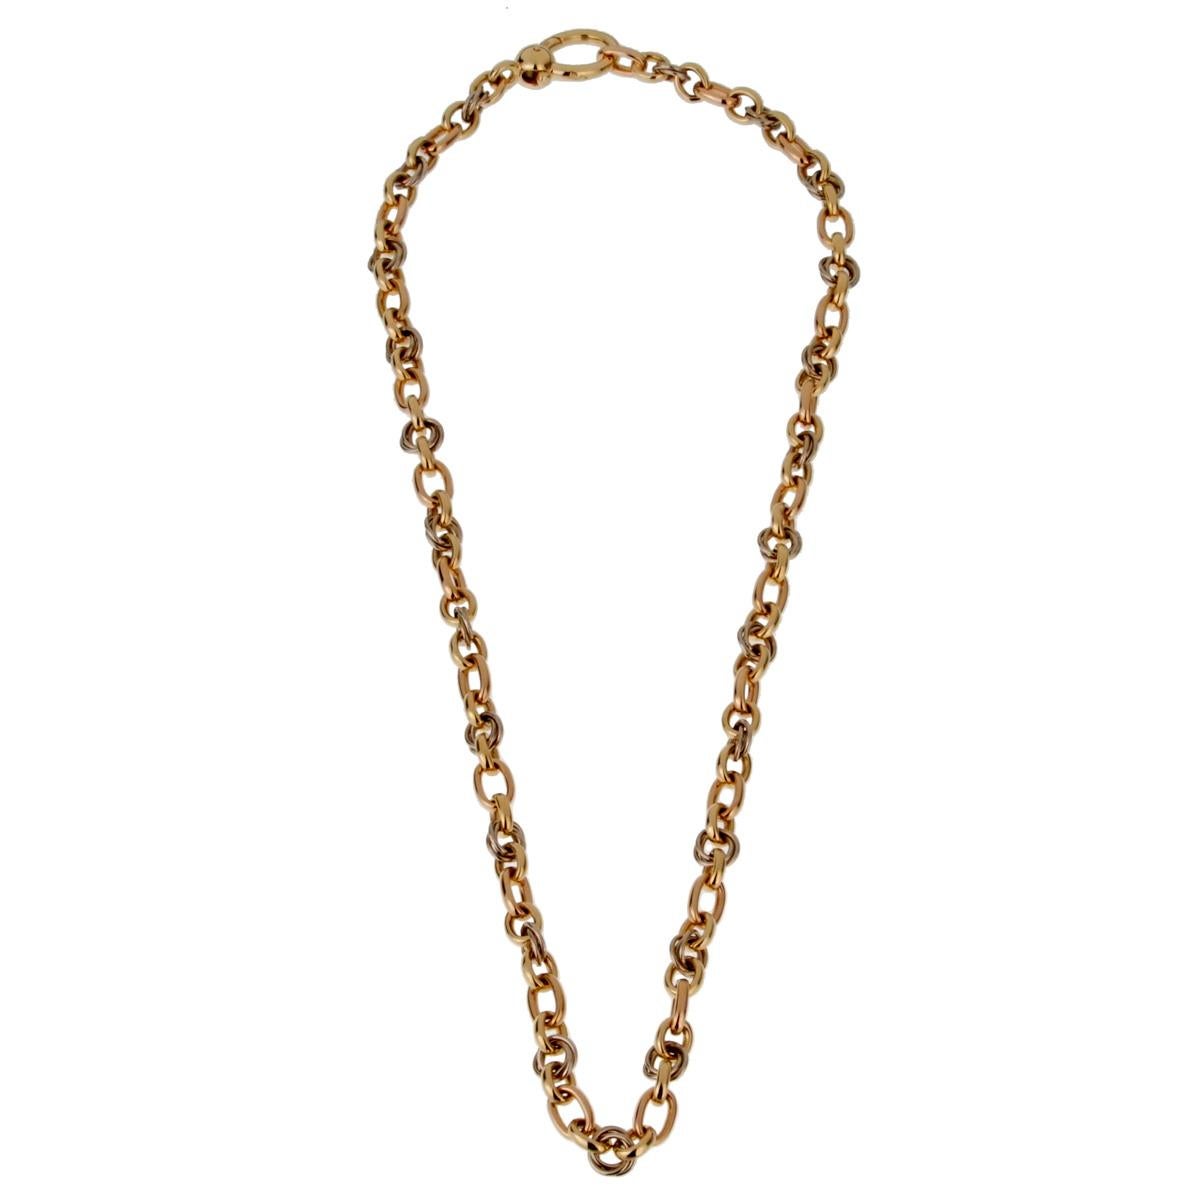 This timeless tricolor 18kt gold Necklace from Pomellato features 18k white, yellow and rose gold links in three shapes - oval, round and twisted - with an oversized clasp.

The necklace measures .23